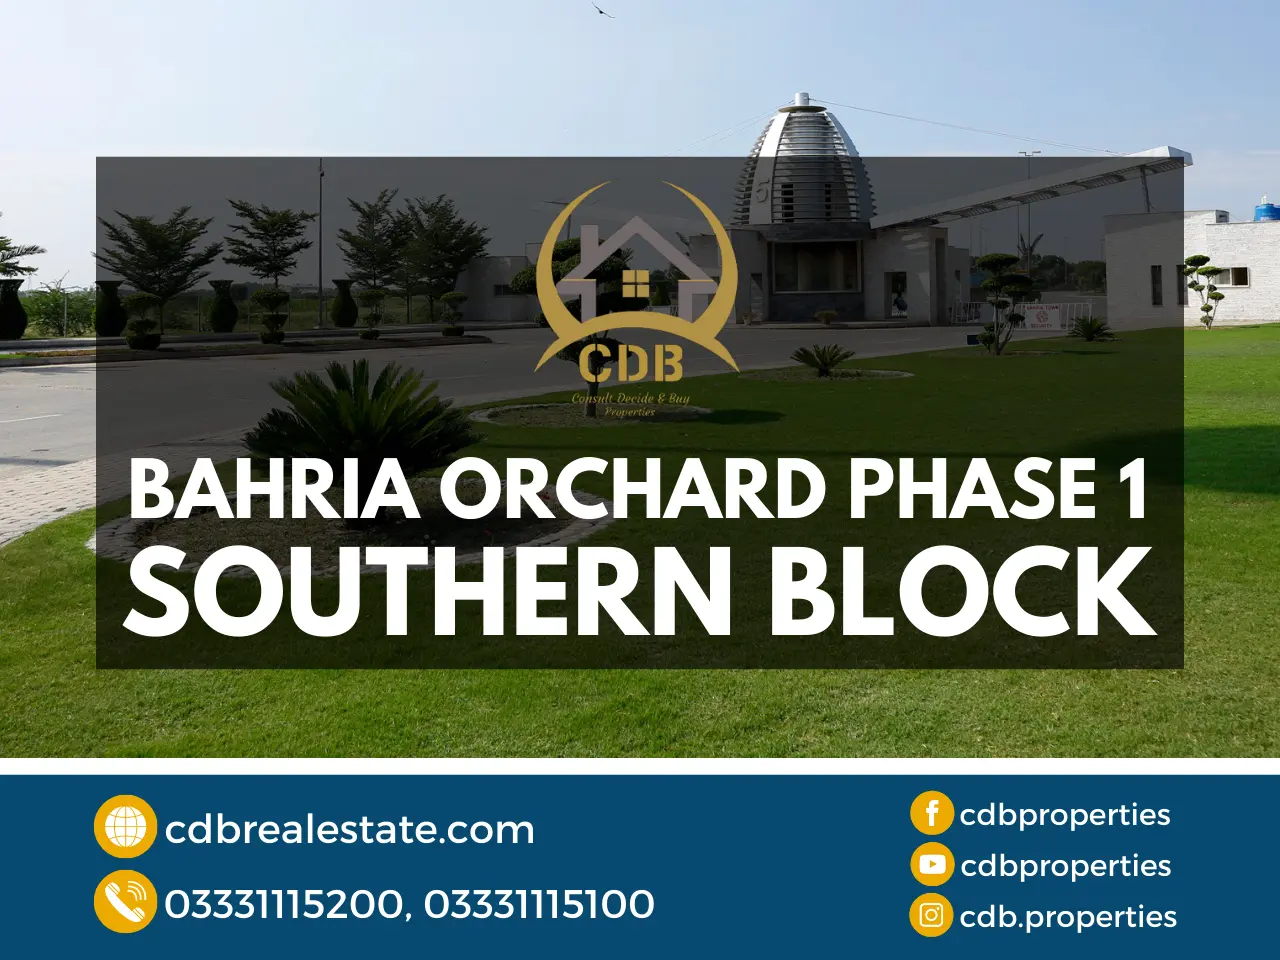 Bahria Orchard Phase 1 - Southern block